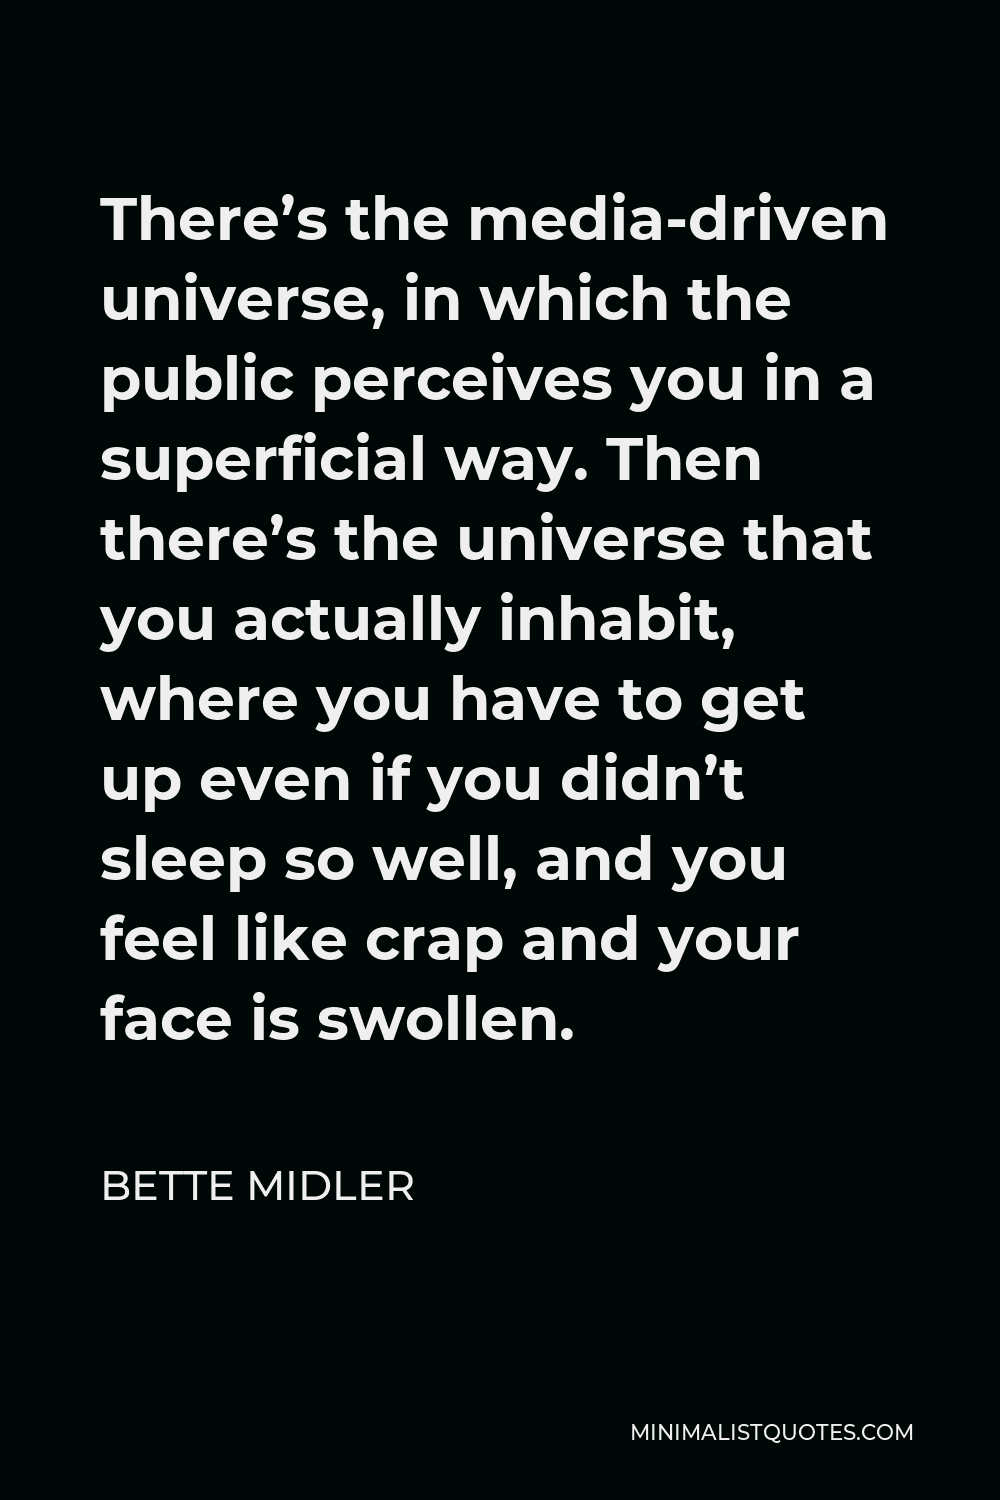 Bette Midler Quote - There’s the media-driven universe, in which the public perceives you in a superficial way. Then there’s the universe that you actually inhabit, where you have to get up even if you didn’t sleep so well, and you feel like crap and your face is swollen.